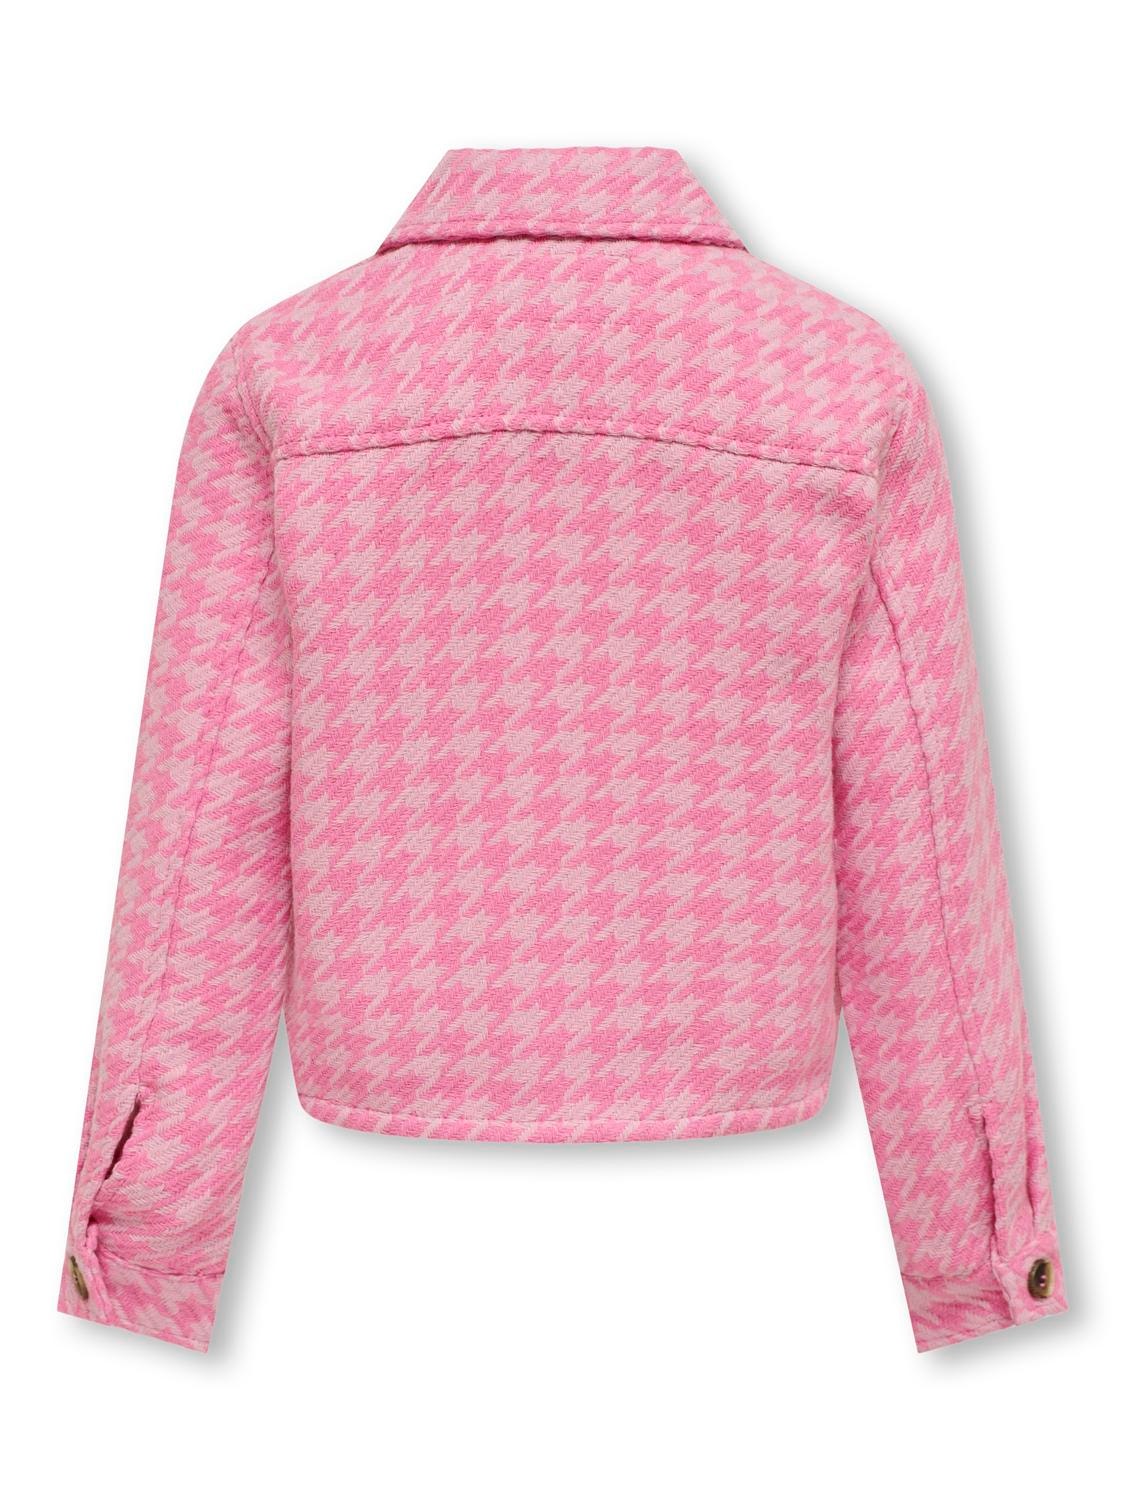 ONLY Checked jacket -Begonia Pink - 15310825